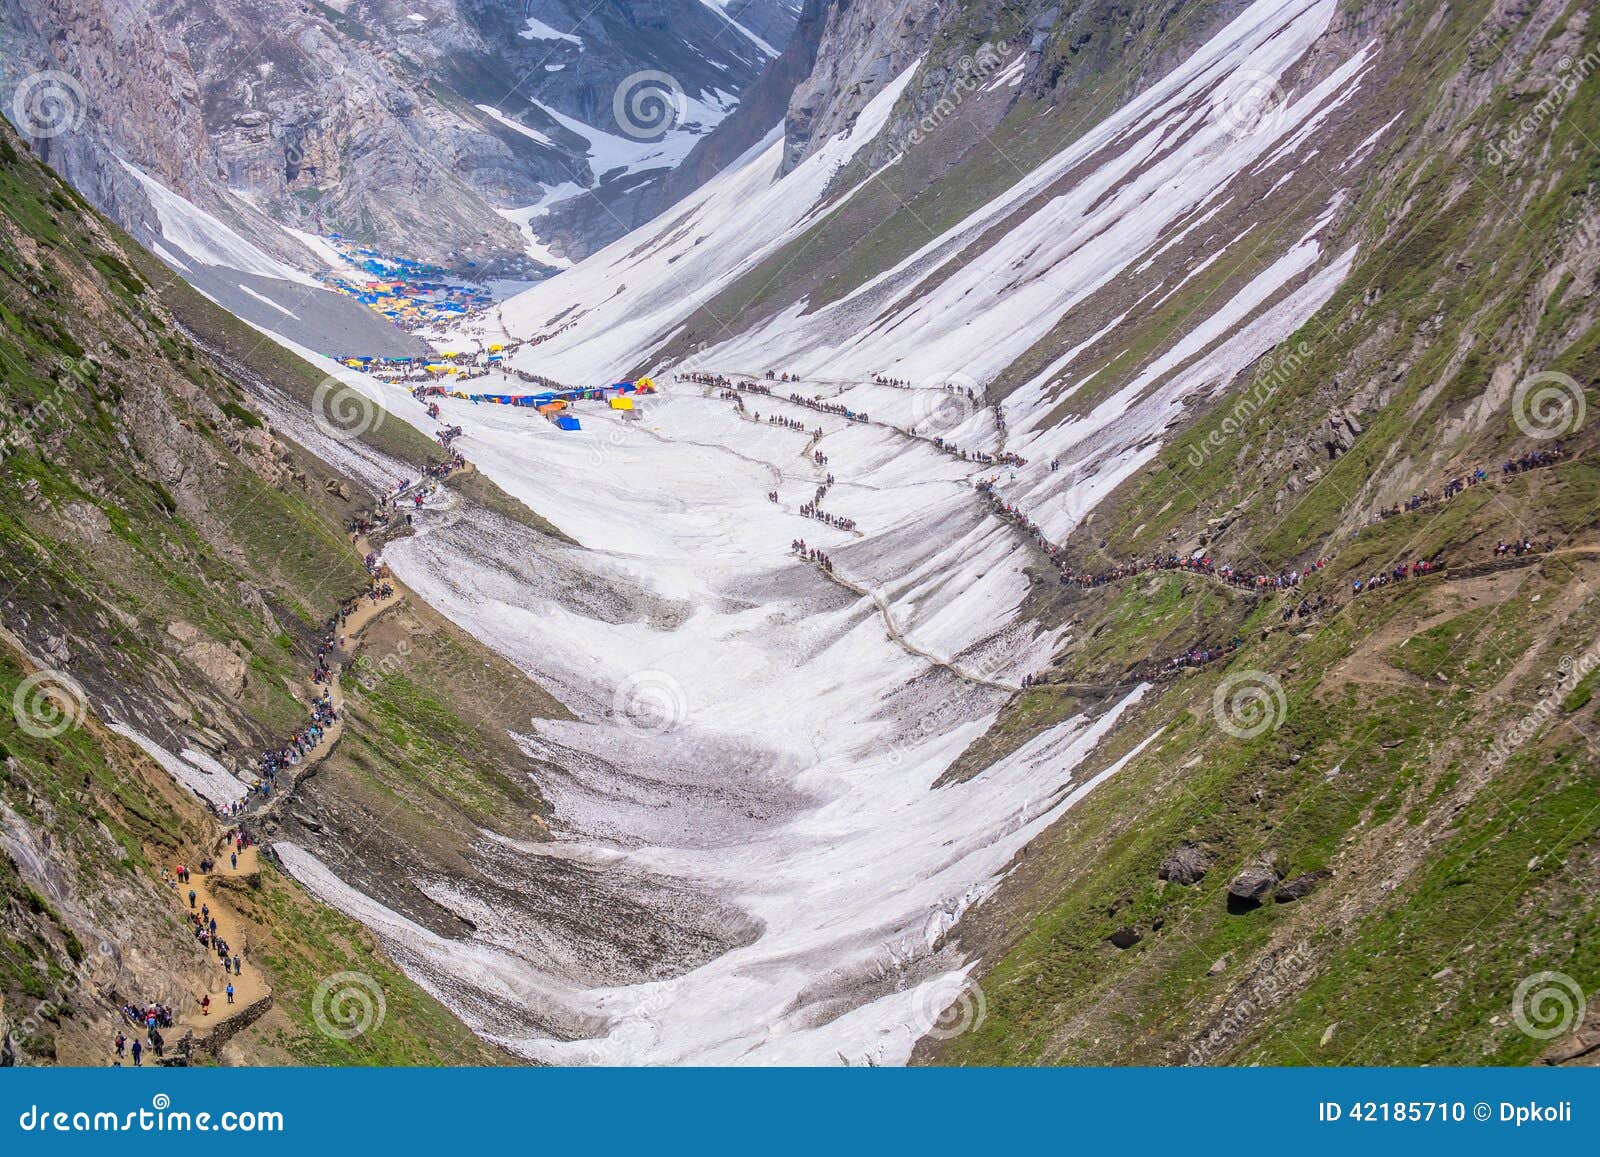 140 Amarnath Yatra Stock Photos Pictures  RoyaltyFree Images  iStock